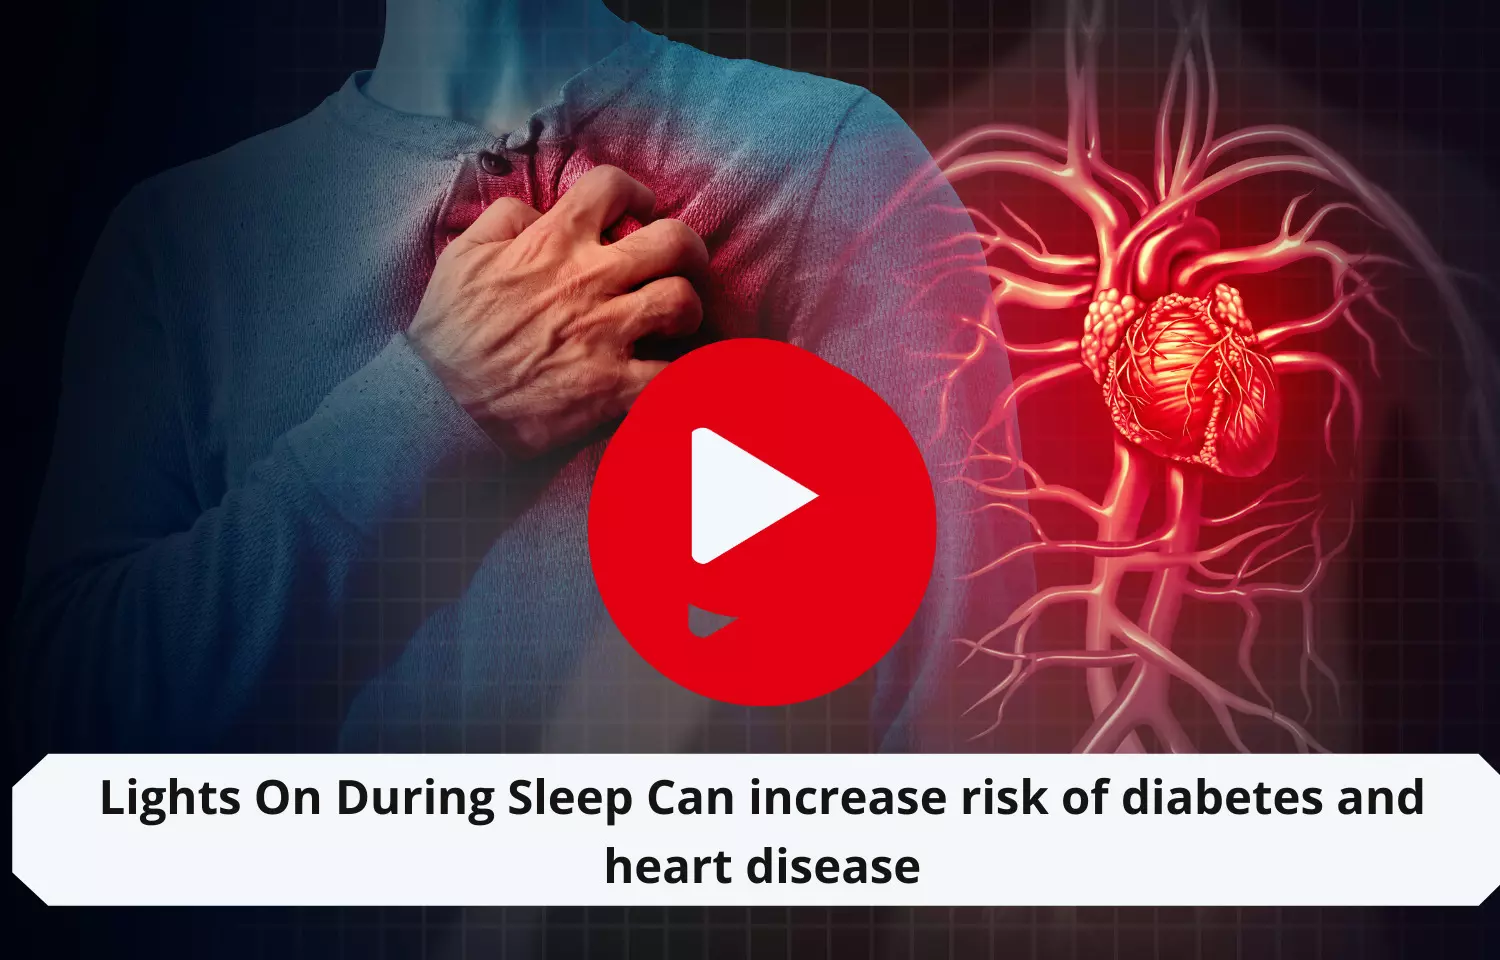 Lights On During Sleep to increase risk of diabetes and heart disease